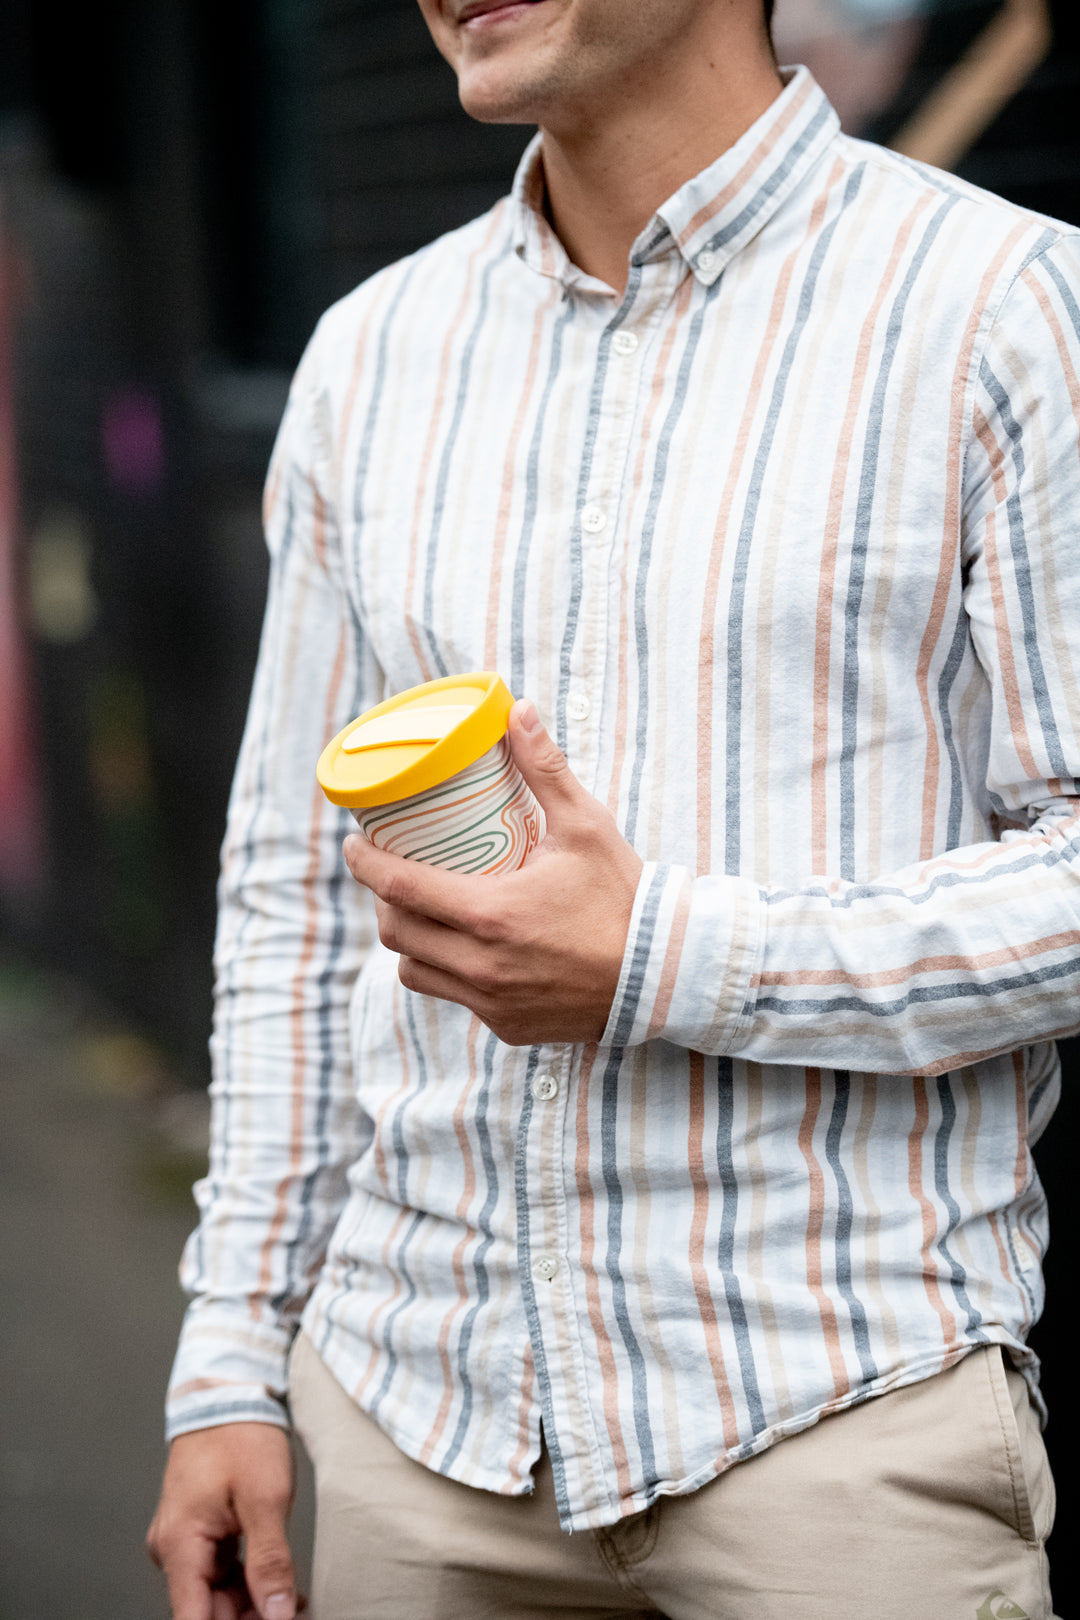 Man holding cup with reusable lid